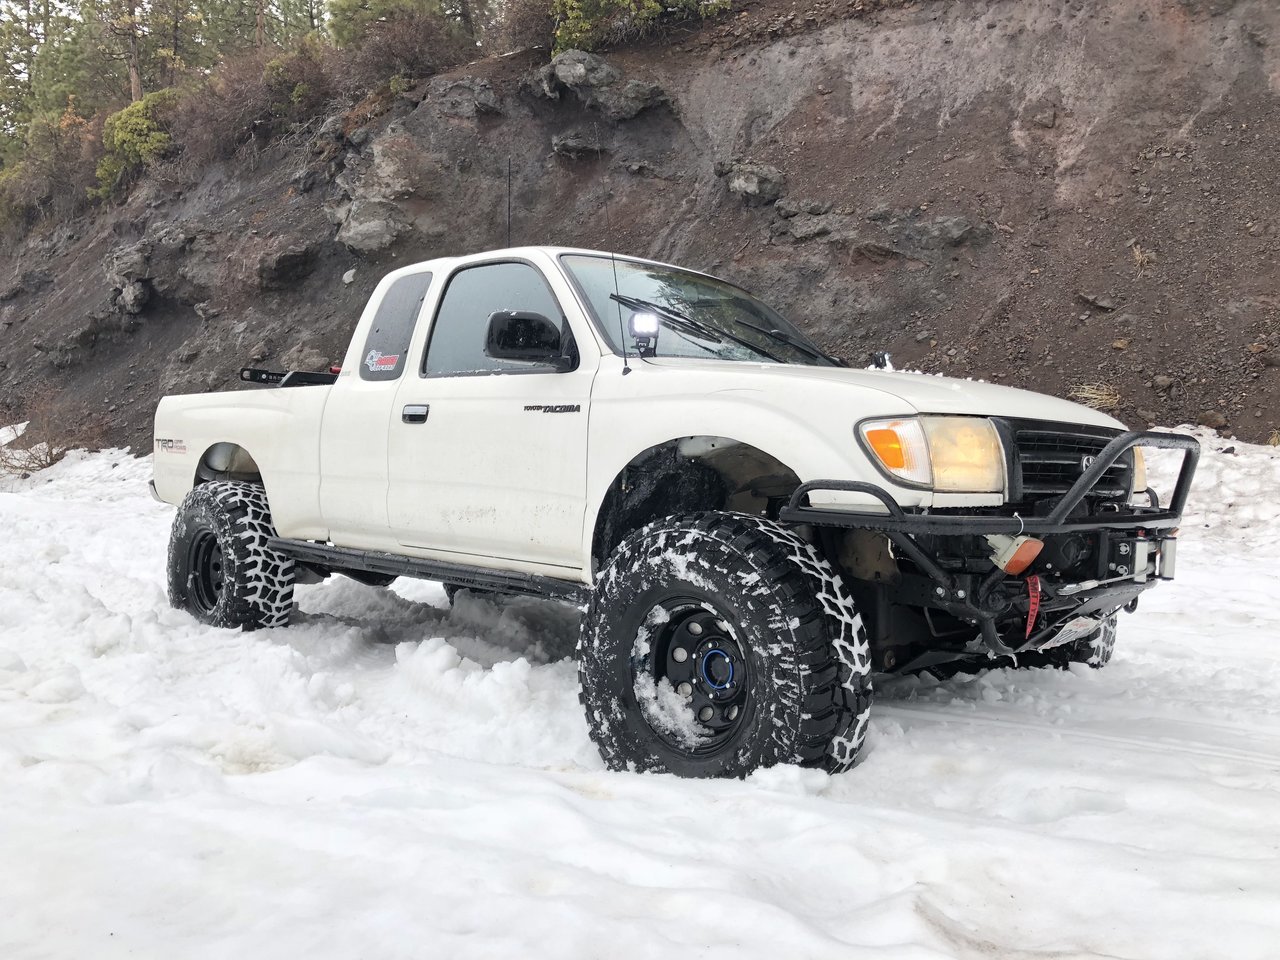 My name is Michael, I bought my tacoma in 2014 to daily drive for college. 